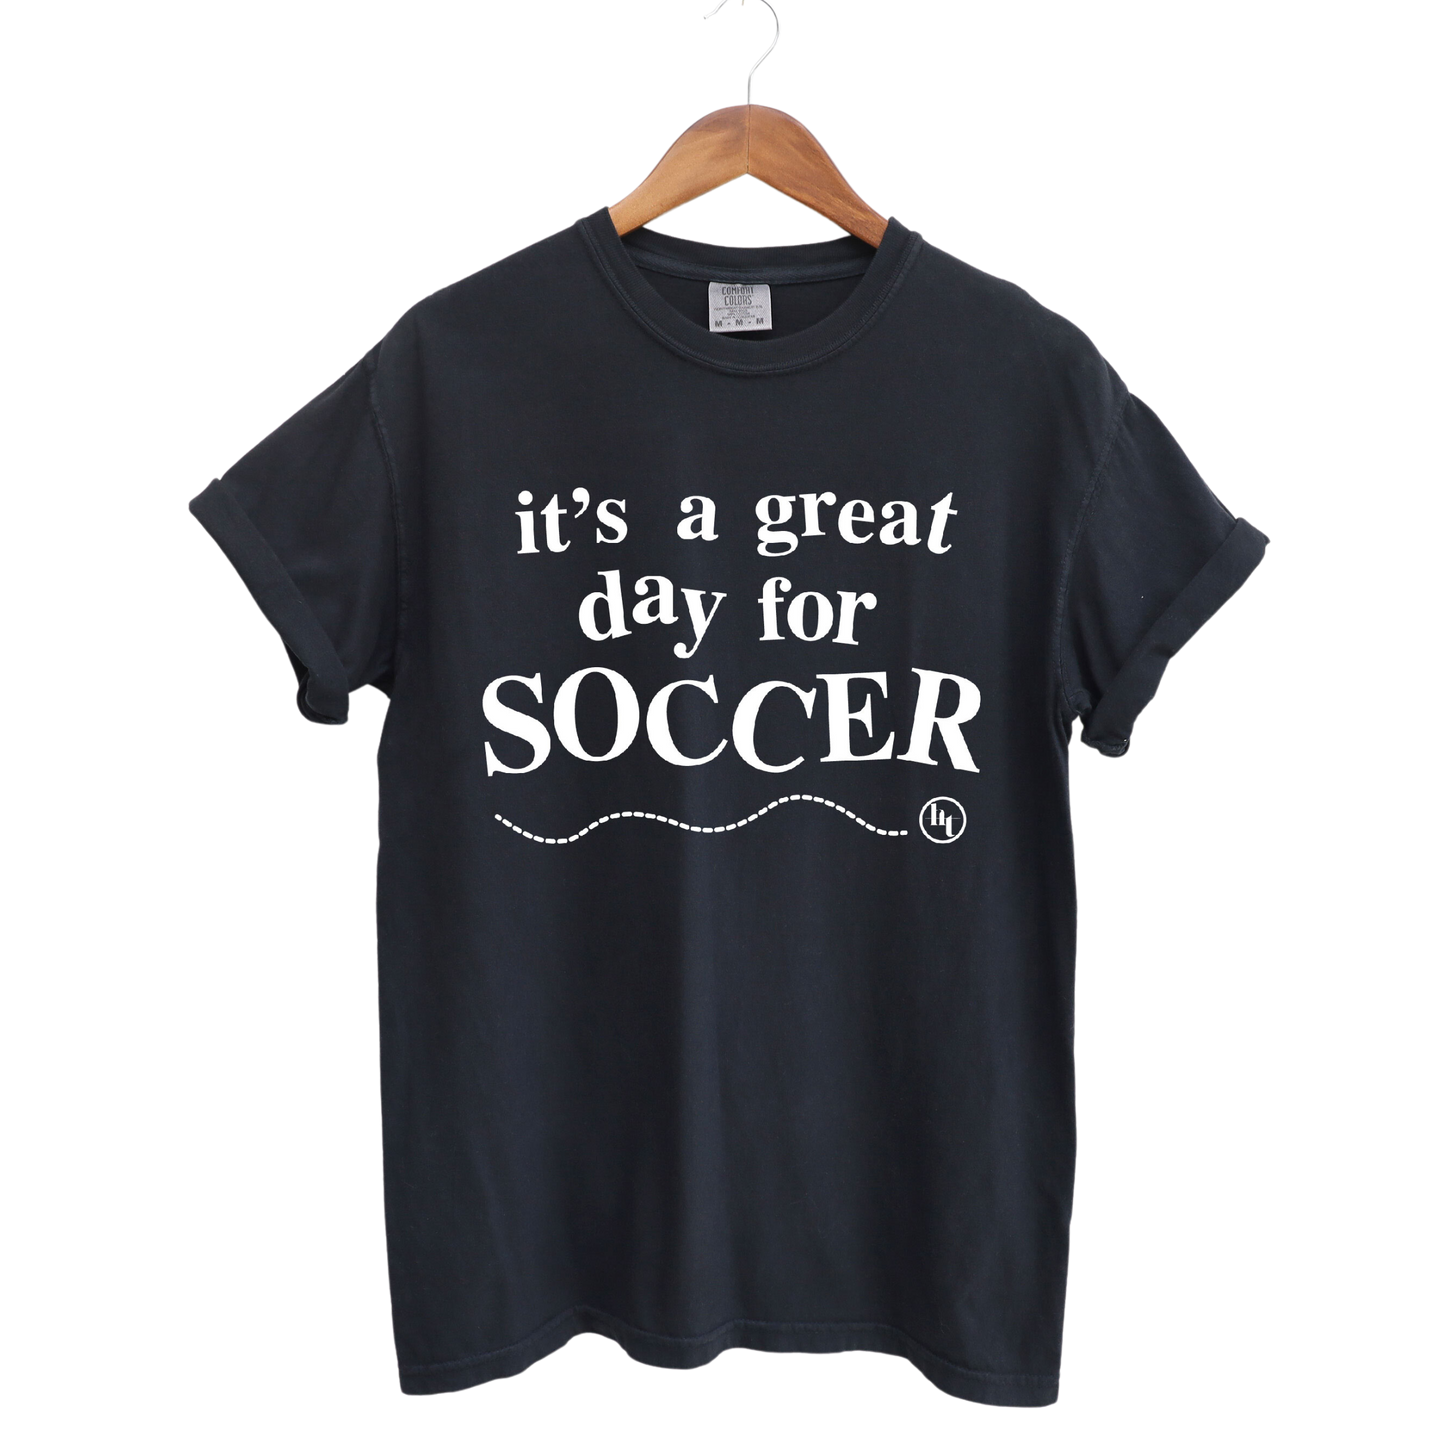 Great Day for Soccer tee